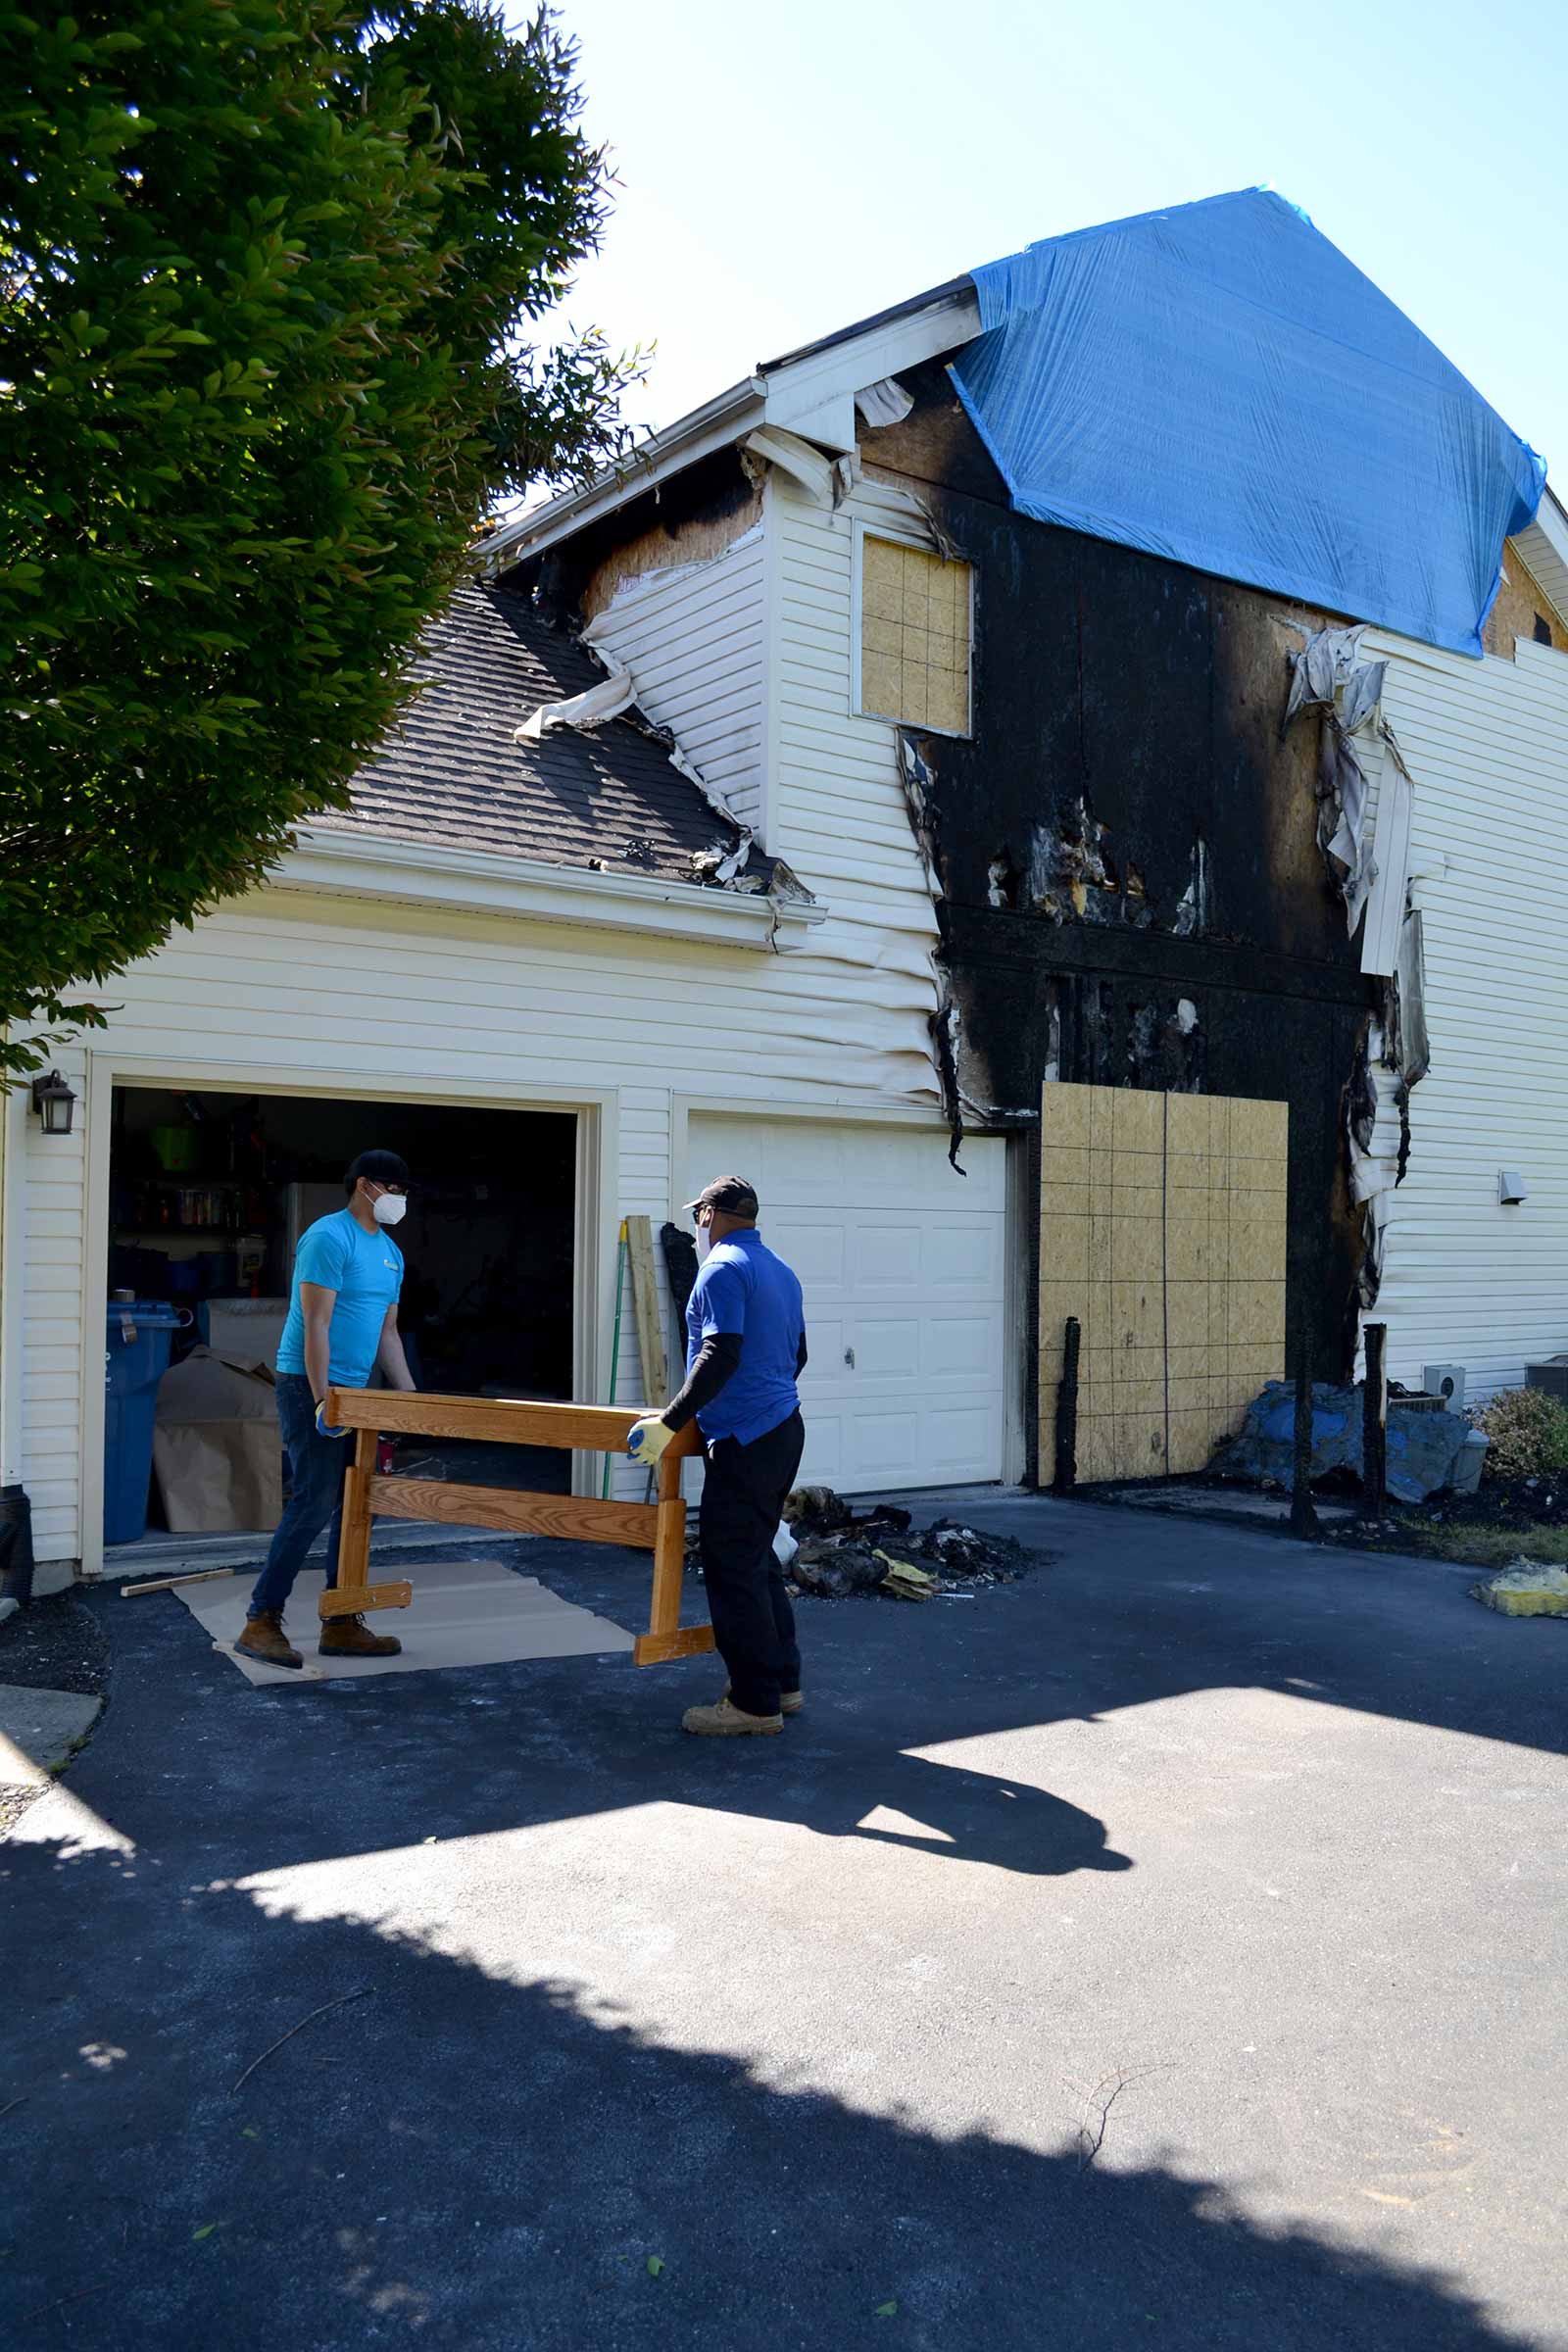 Blue Kangaroo Packoutz contents packout franchise two men remove contents from burned house